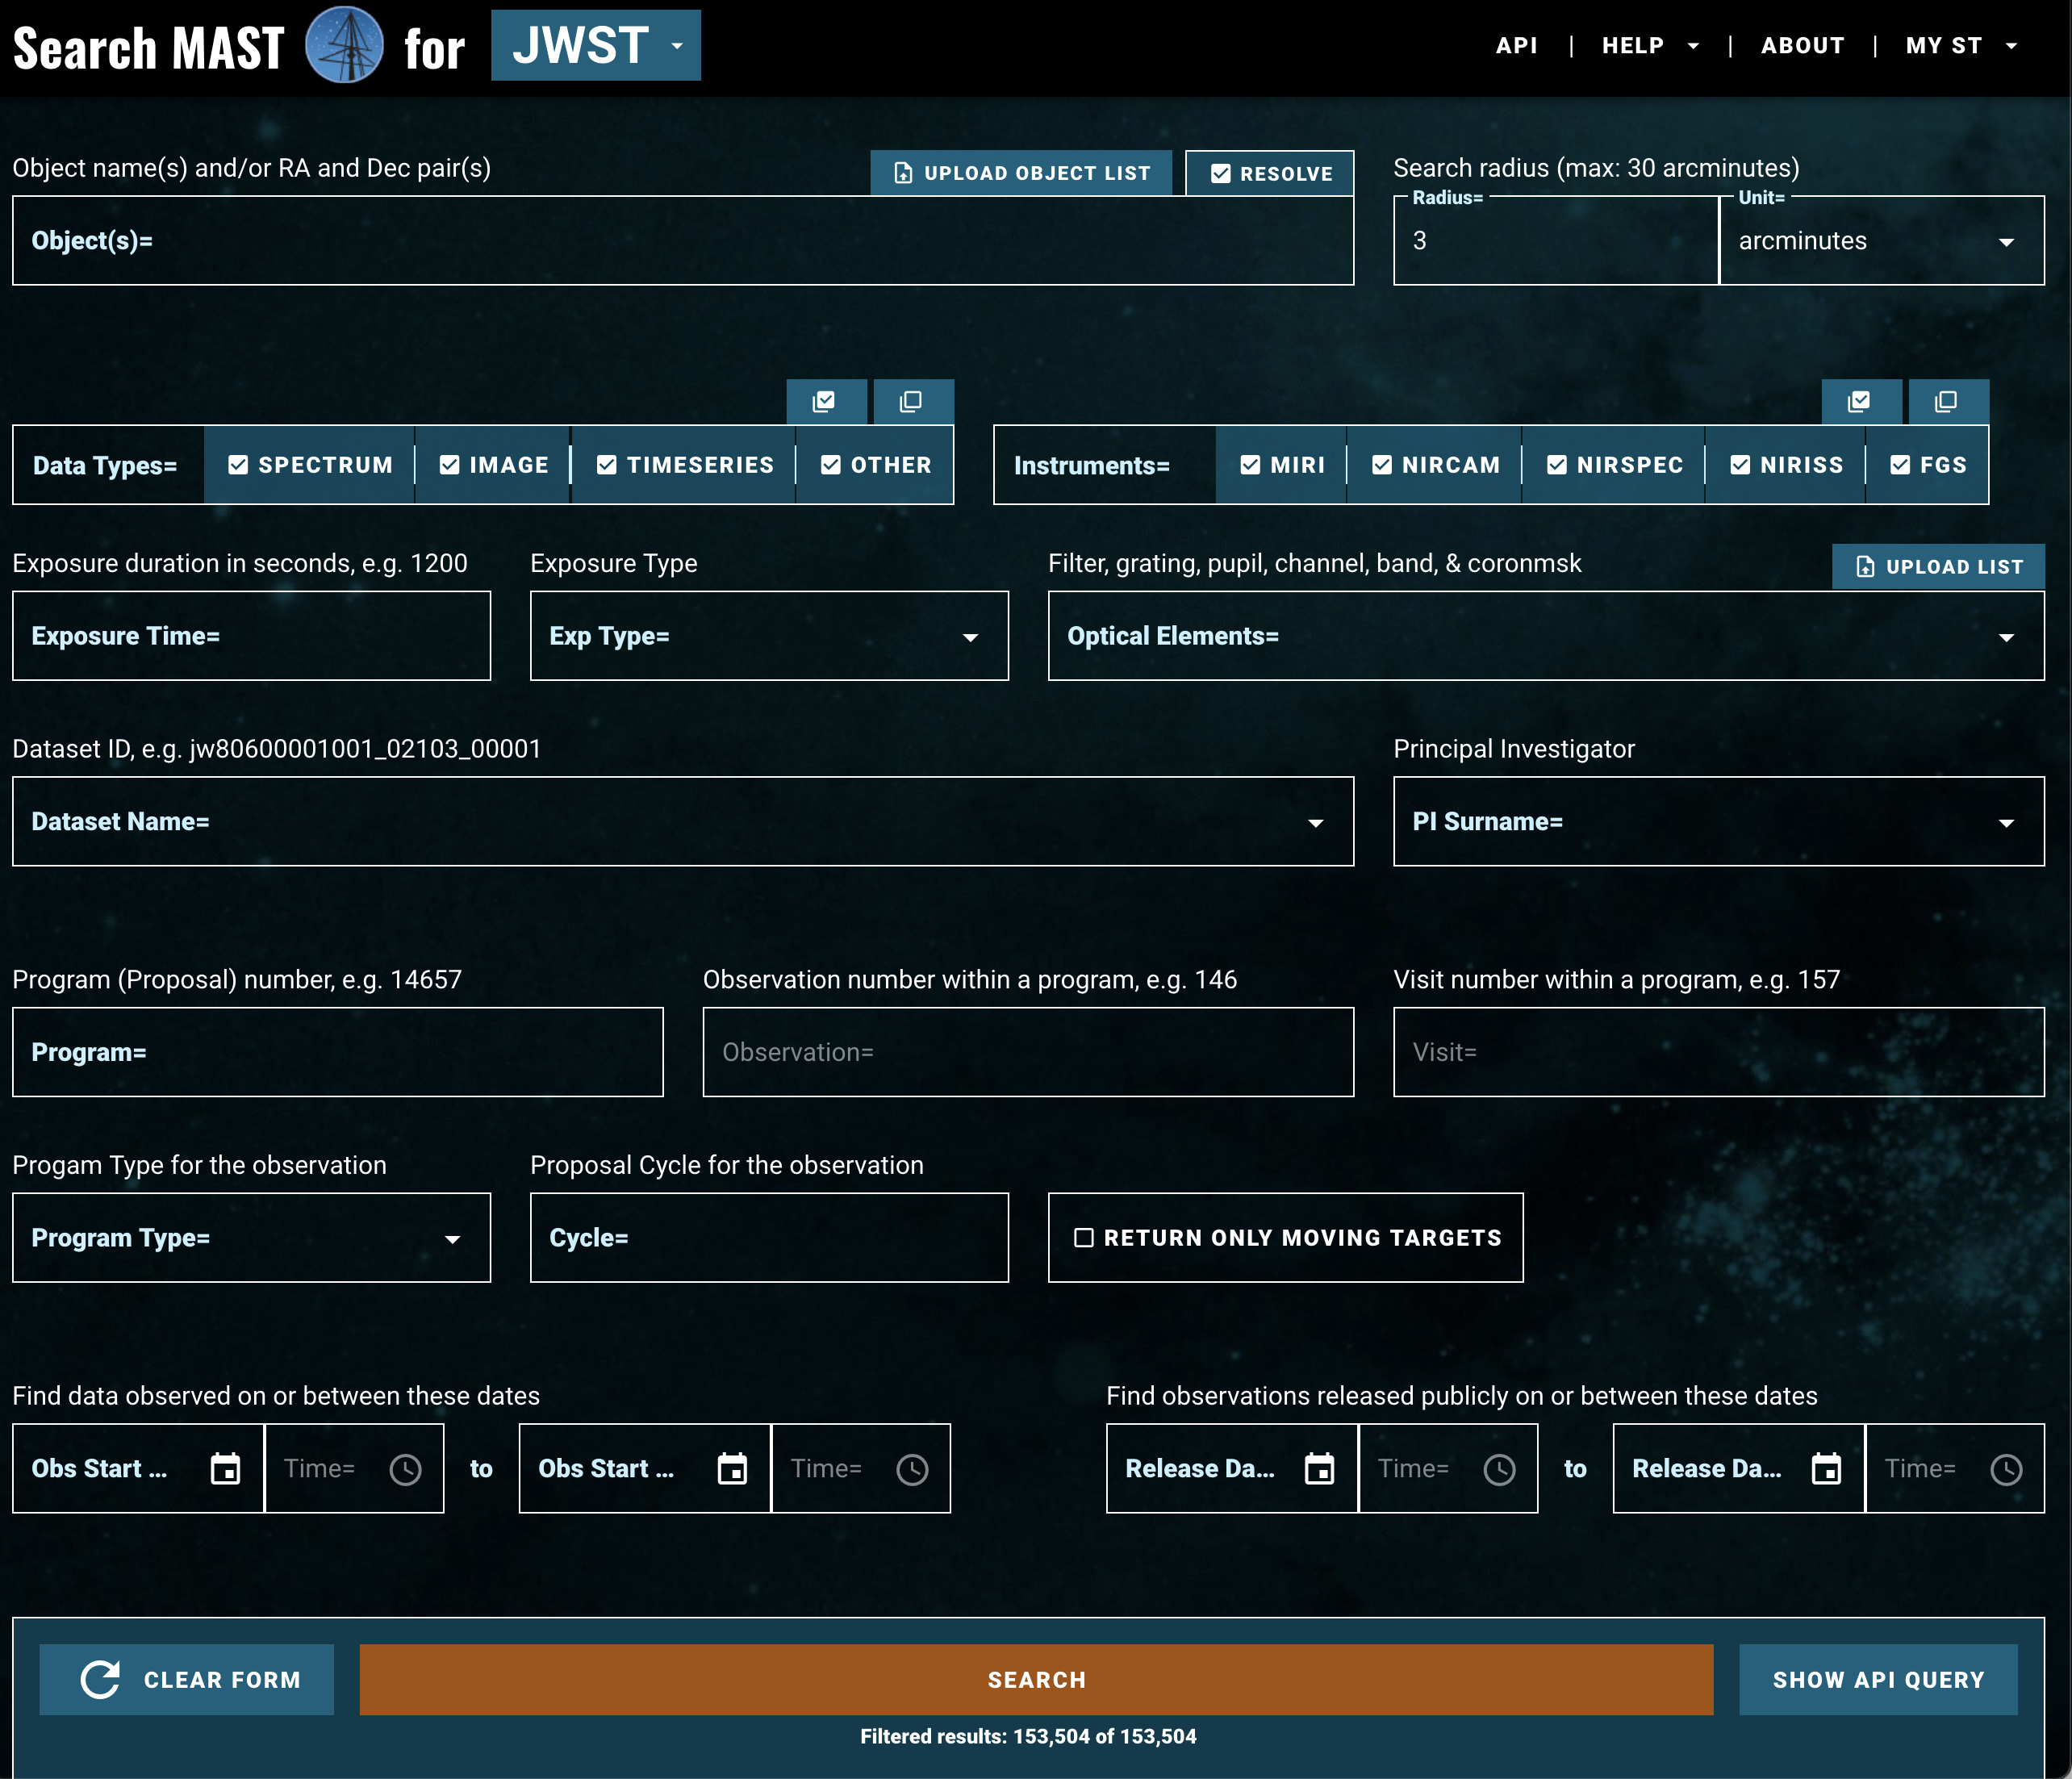 the landing page of the new JWST search form